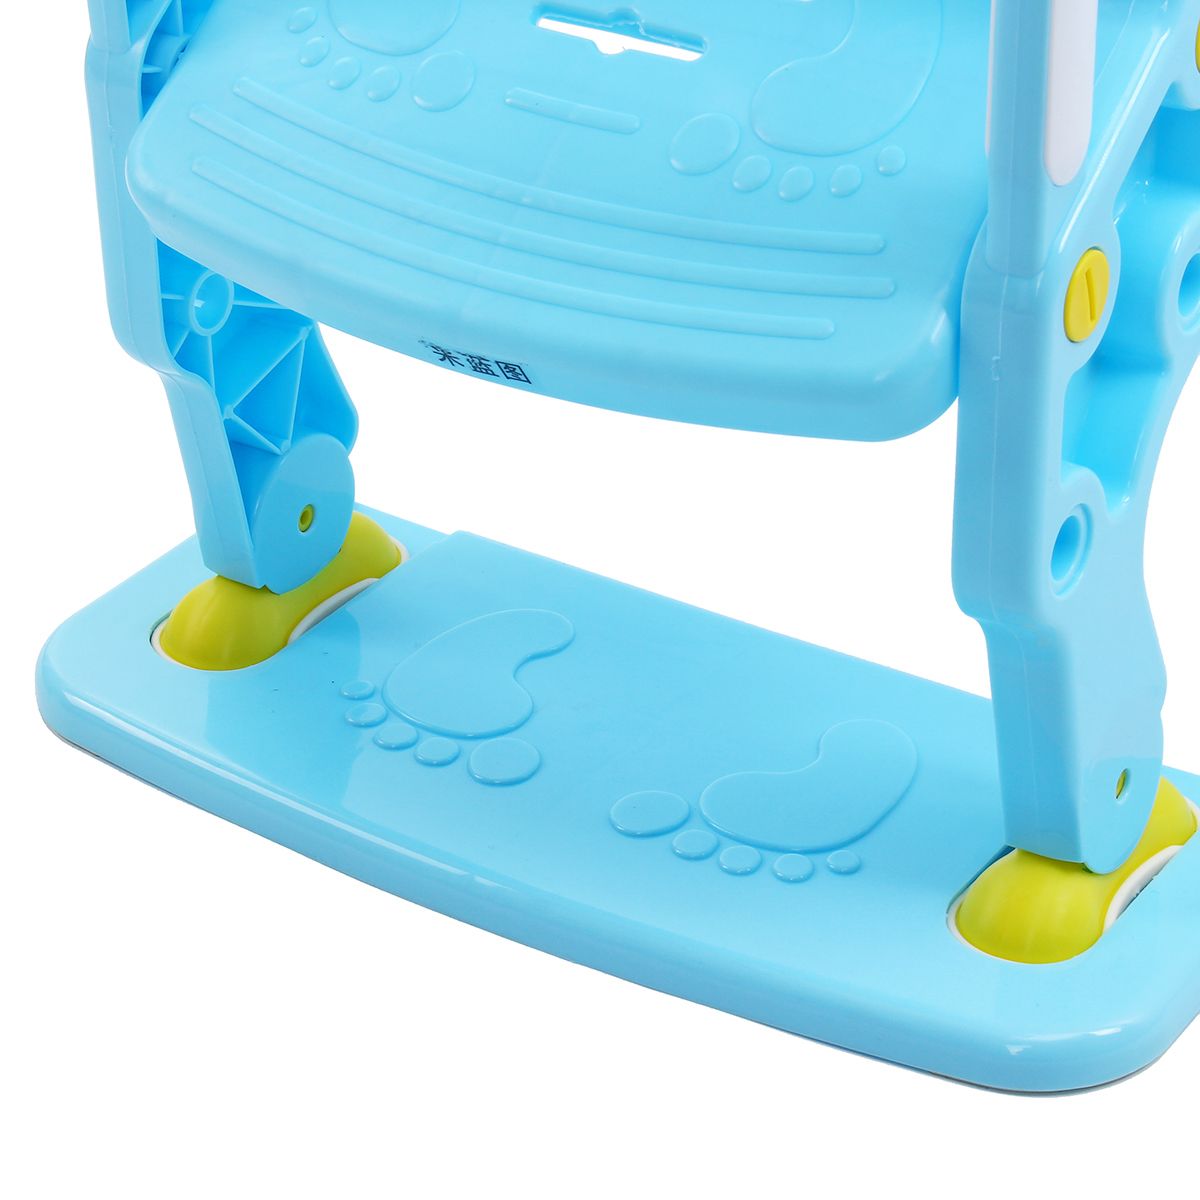 Folding-Baby-Potty-Infant-Kids-Toilet-Training-Seat-with-Adjustable-Ladder-Portable-Urinal-Potty-Tra-1561507